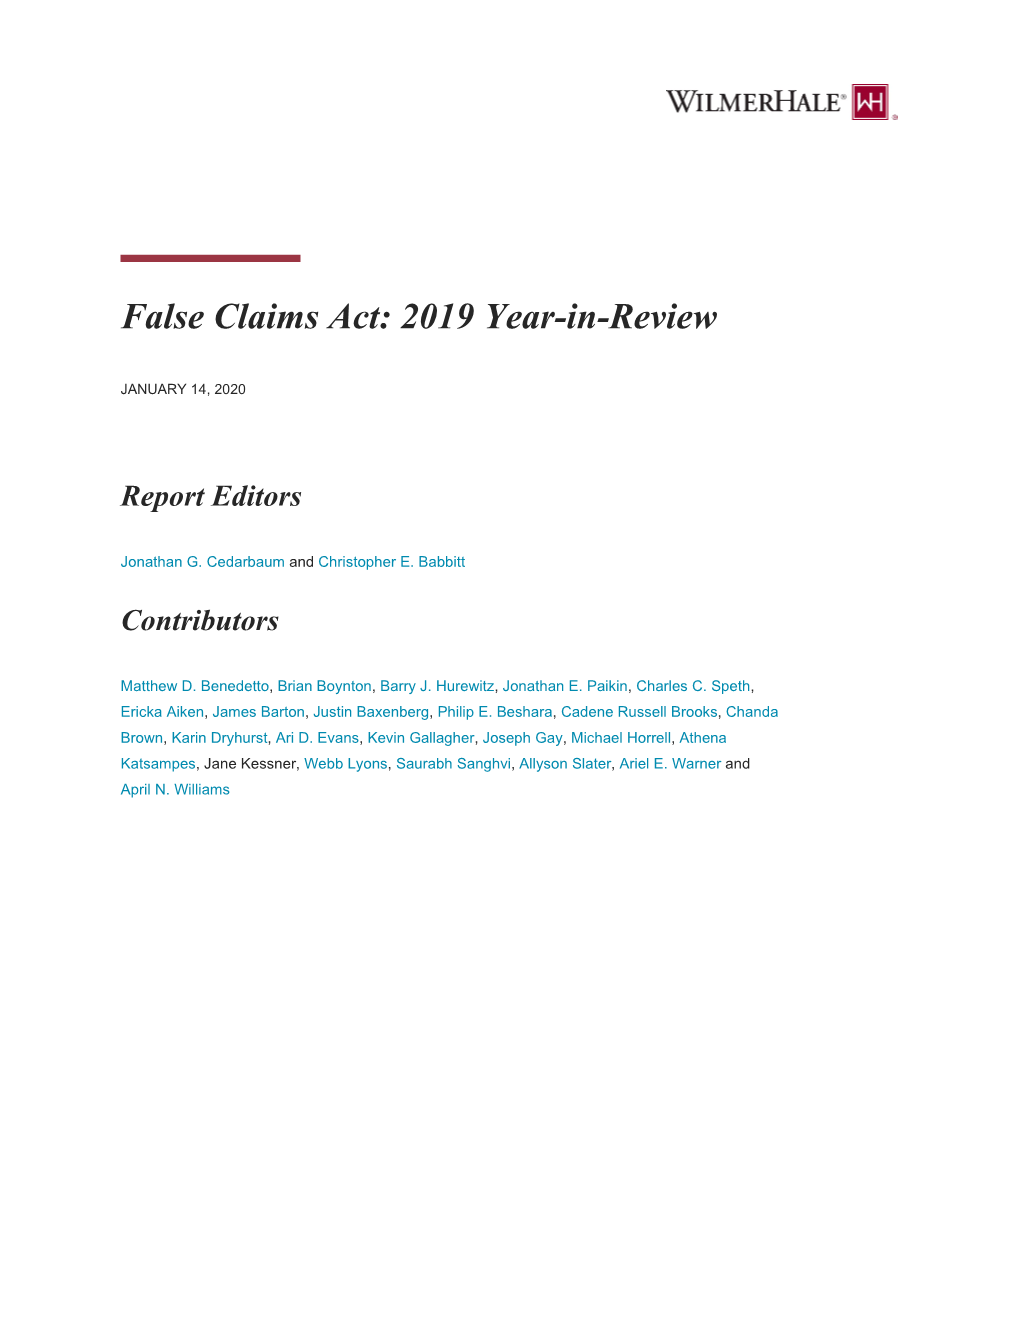 False Claims Act: 2019 Year-In-Review